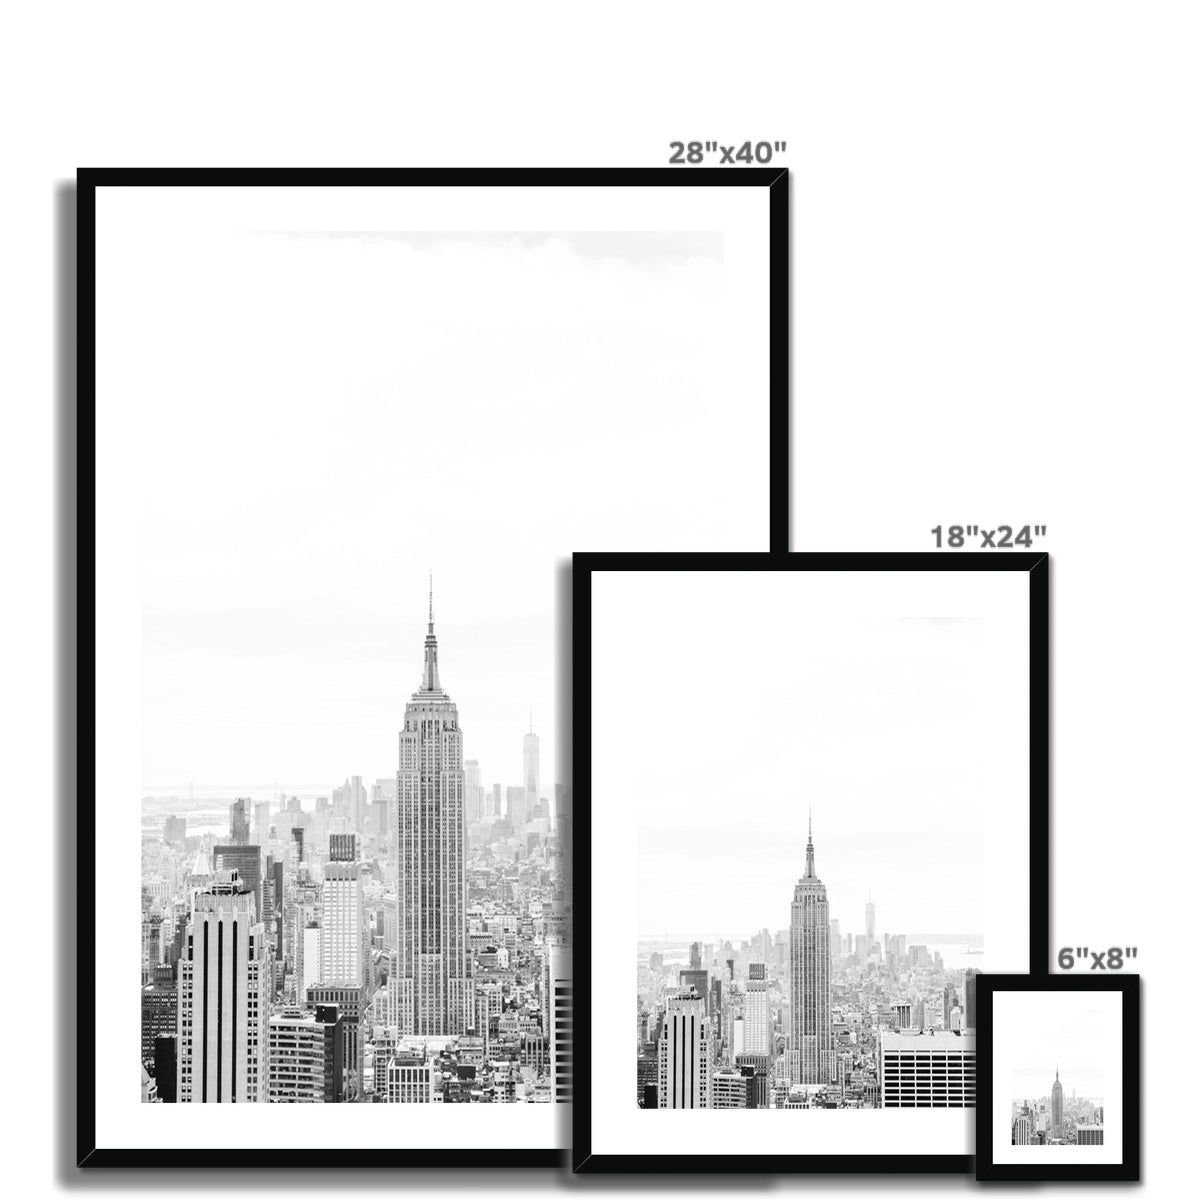 EMPIRE STATE BUILDING BW Framed & Mounted Print